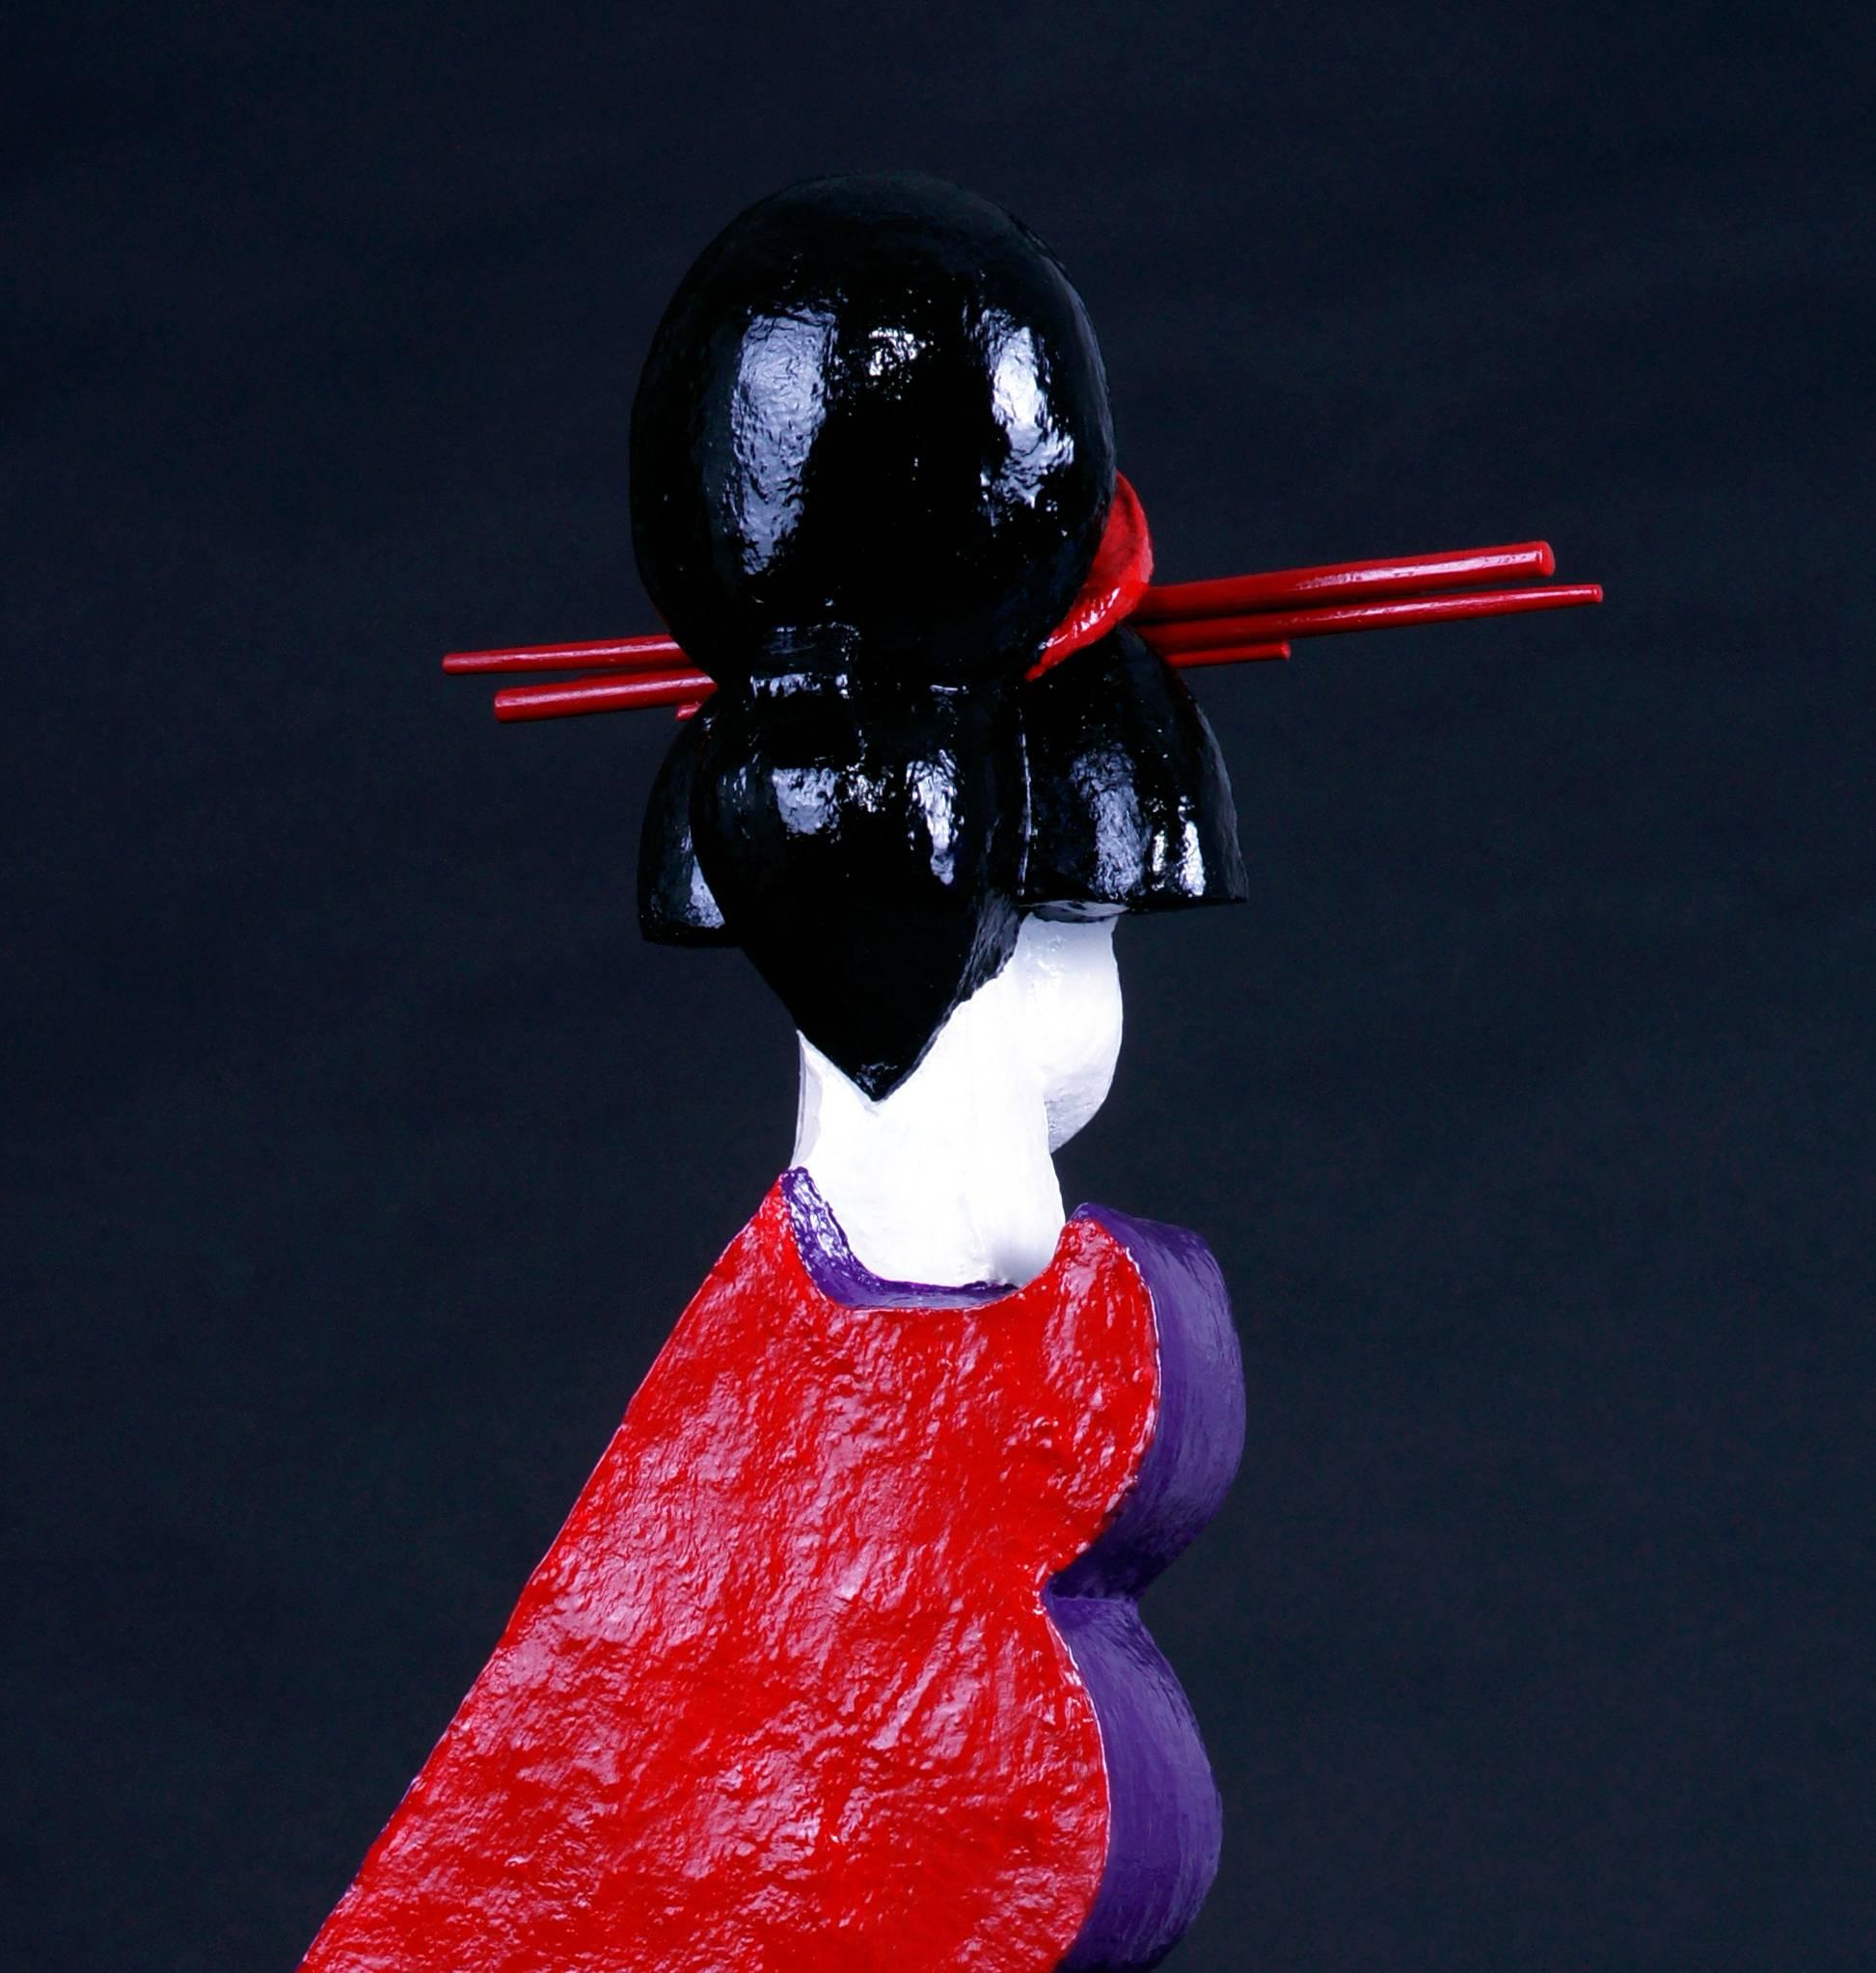 Mariko’s Gouvernante is an unique contemporary sandstone sculpture painted with red, purple, black and white enamel. The geishas collection of the artist expresses the various faces of the femininity. 
  
Mariko grew up in Africa, where she